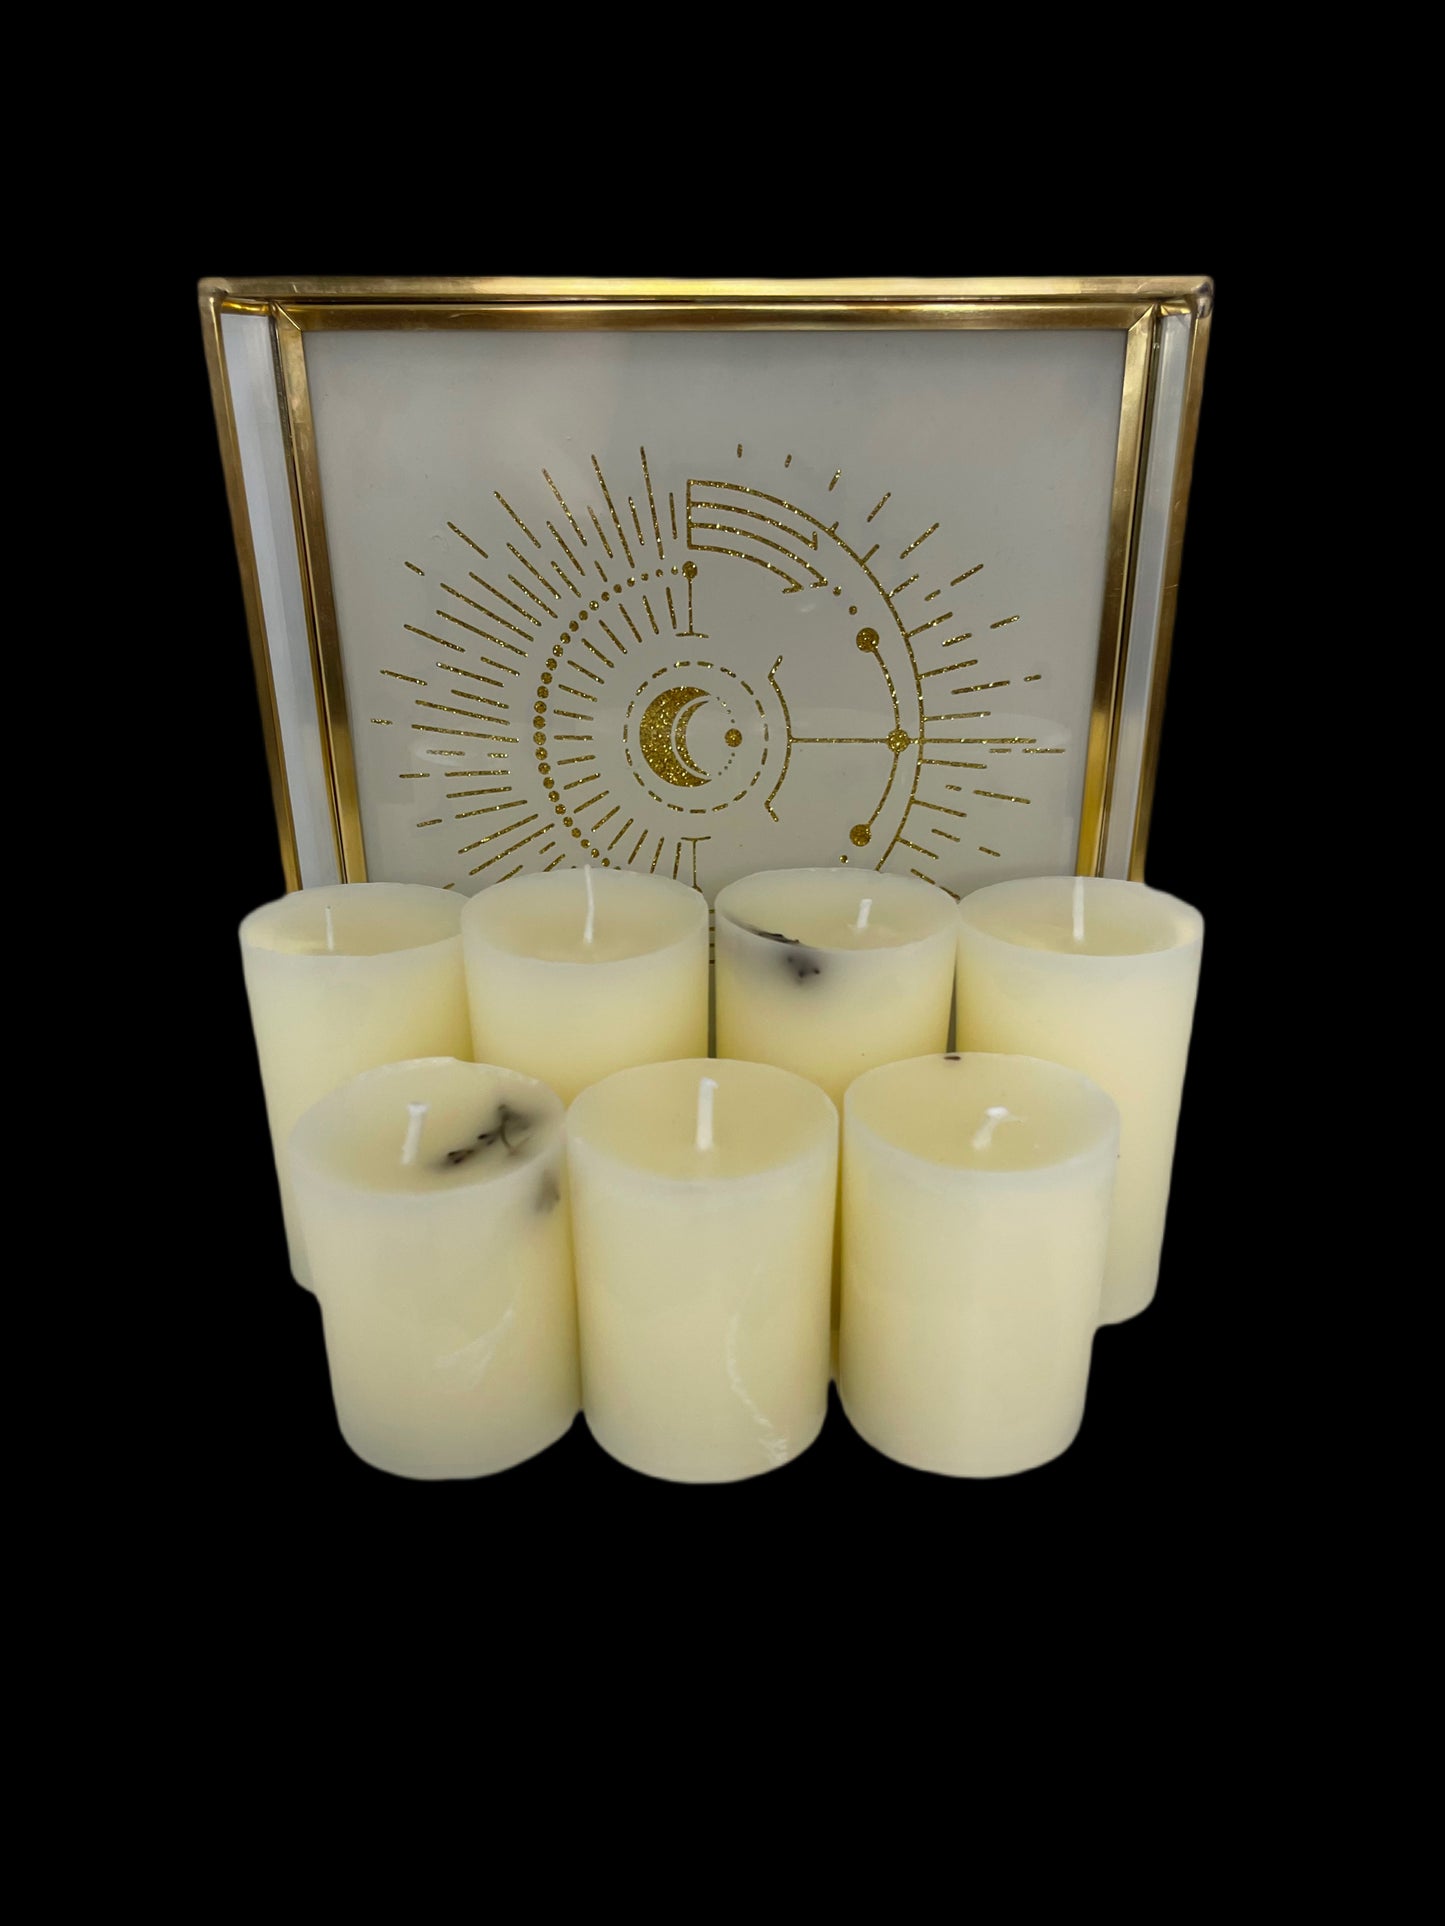 Handmade Beeswax Candles  - Available at West Palm only